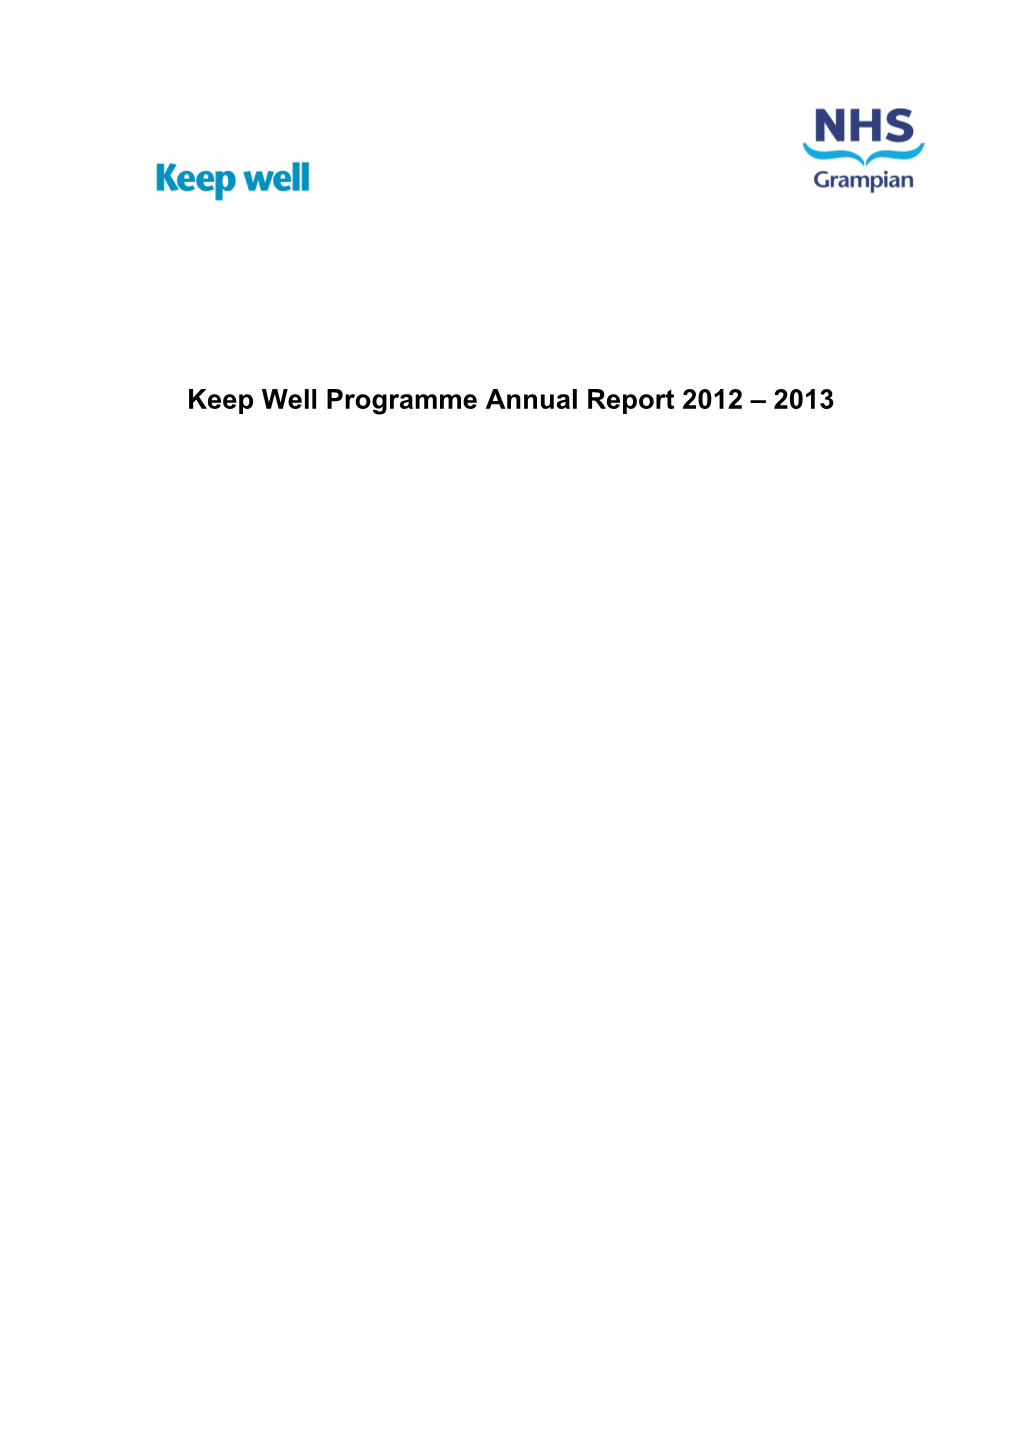 Keep Well Programme Annual Report 2012 2013